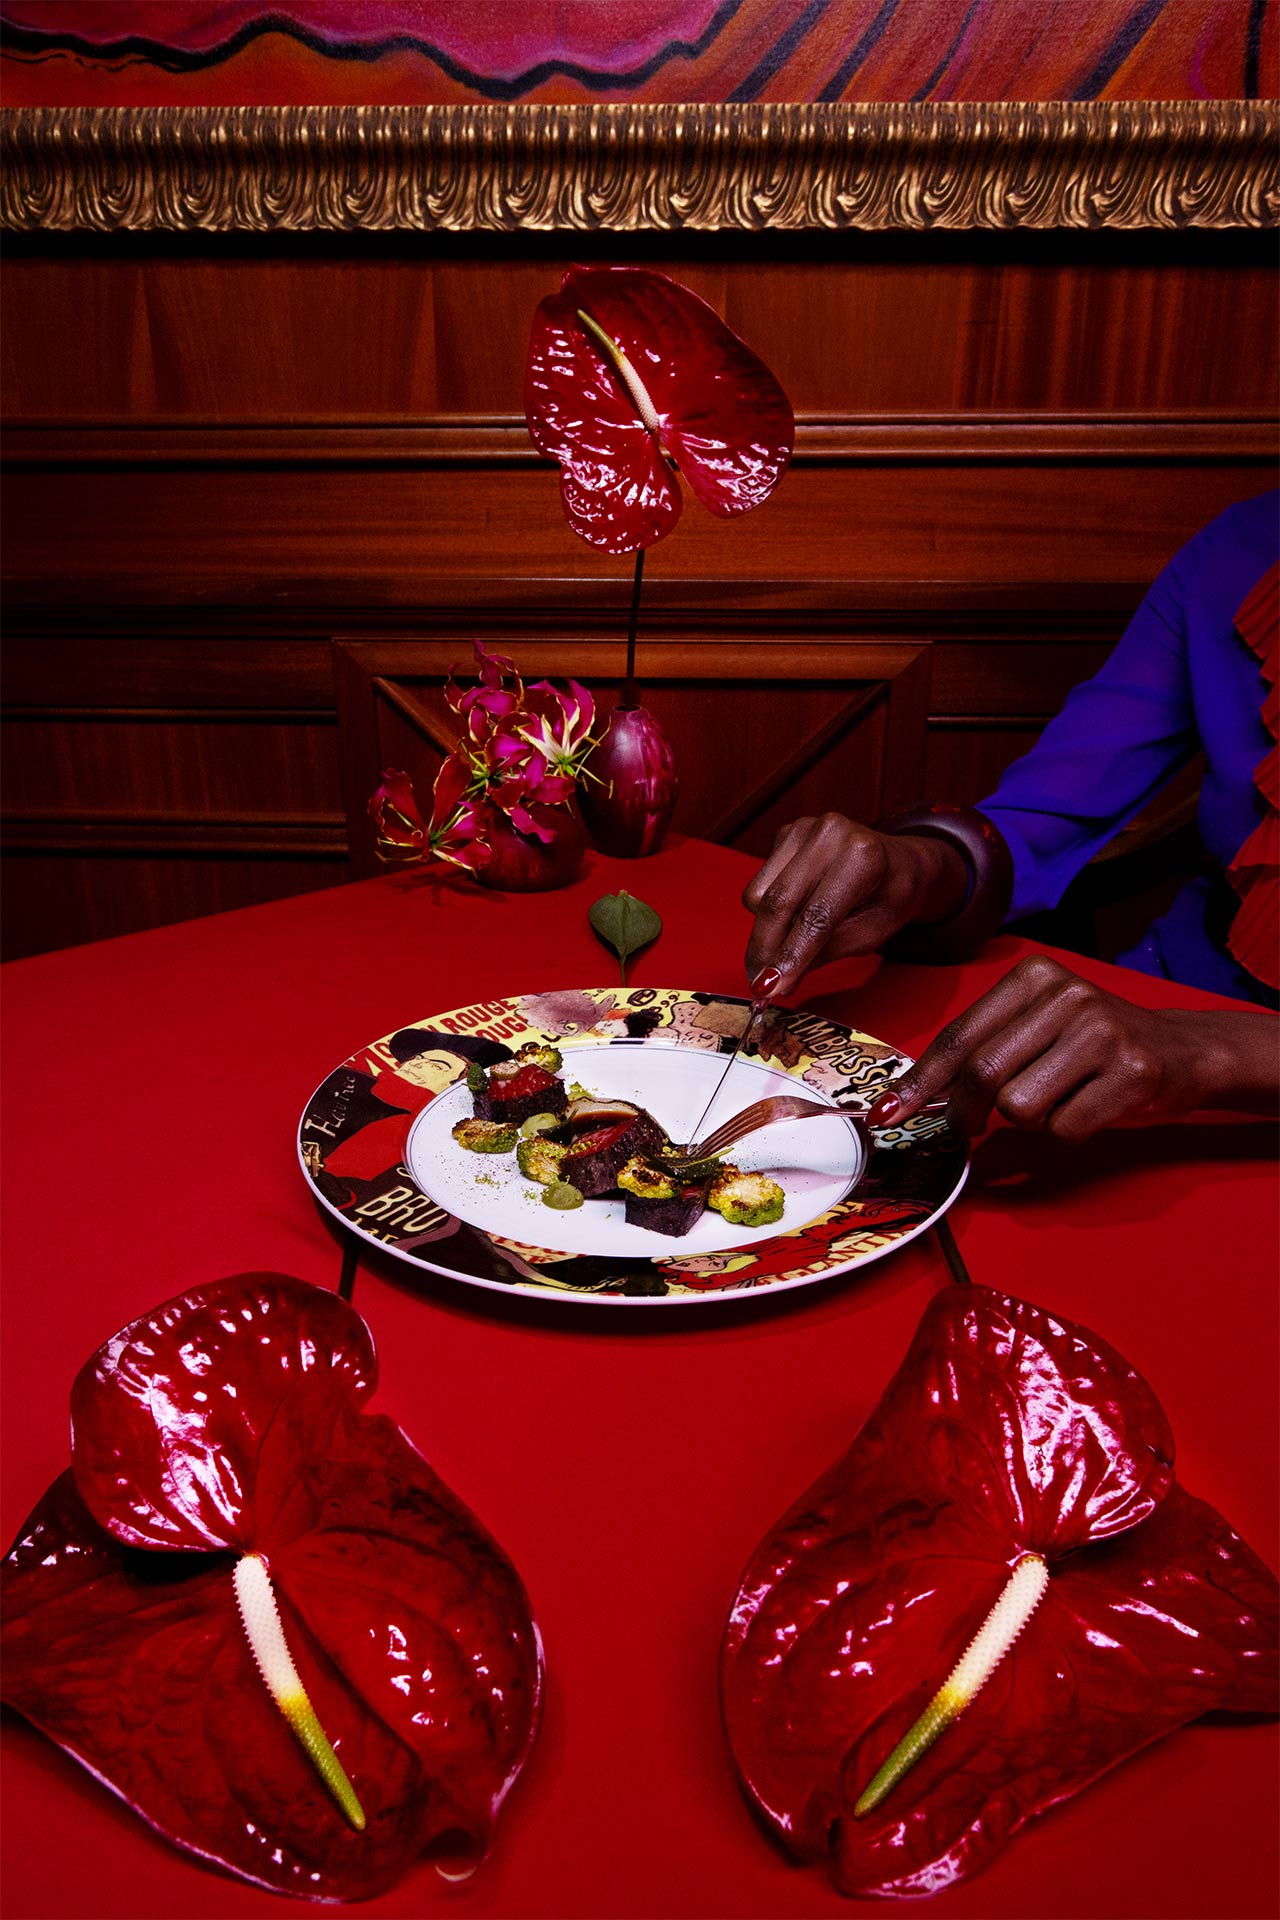 A woman cutting food on a red table in a red room with red flowers